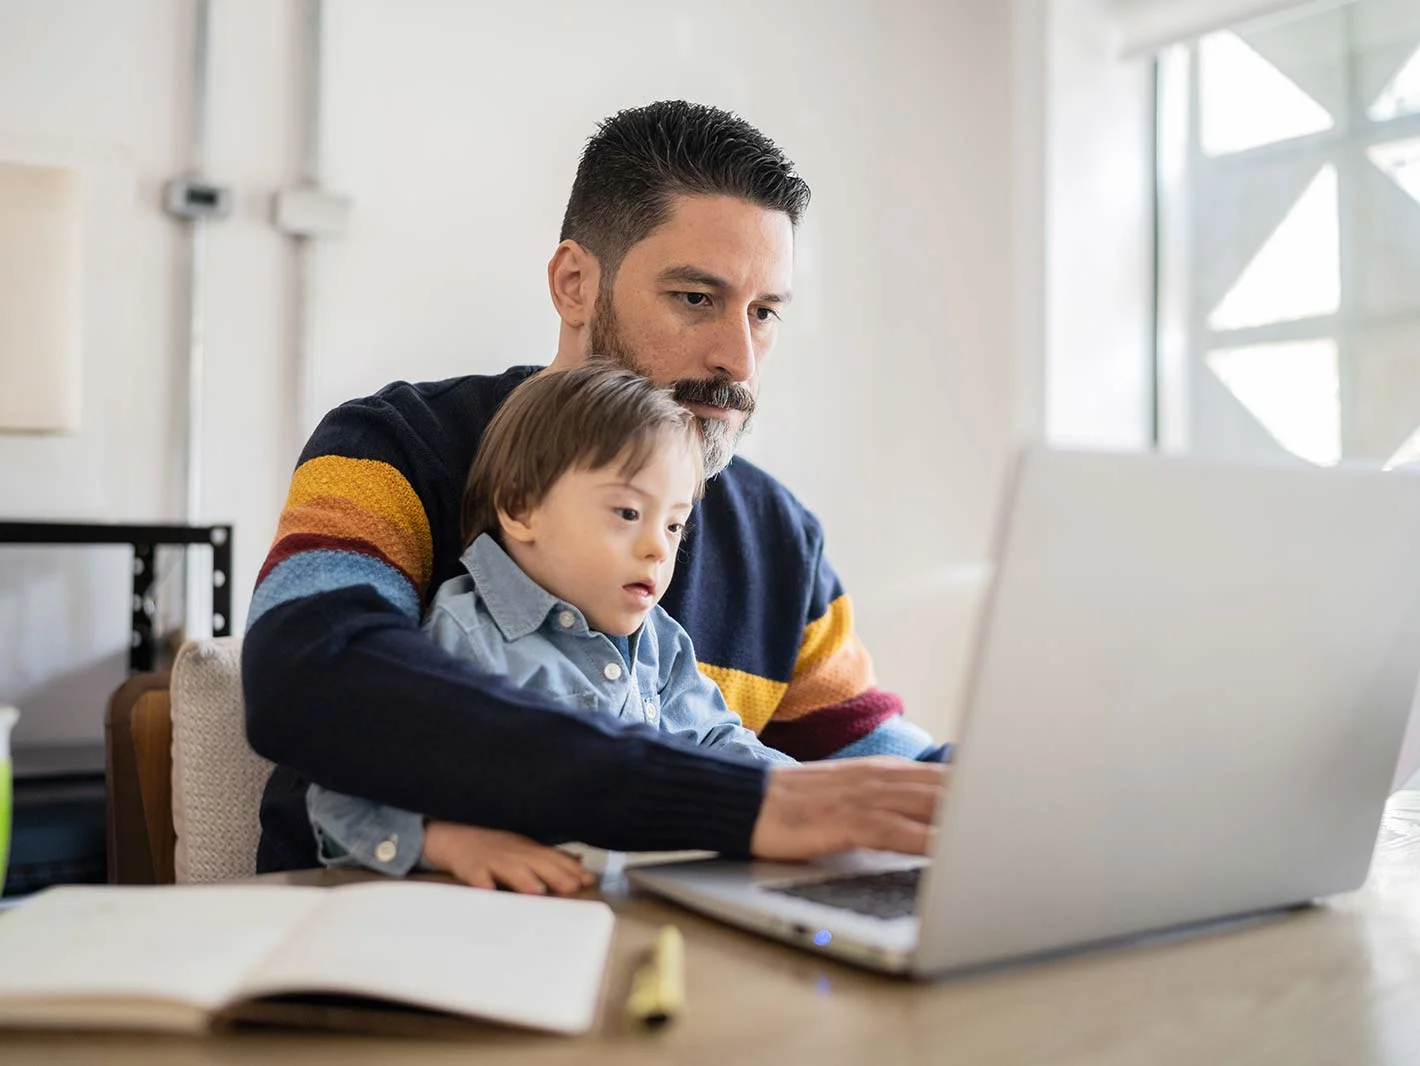 Man working at home with son